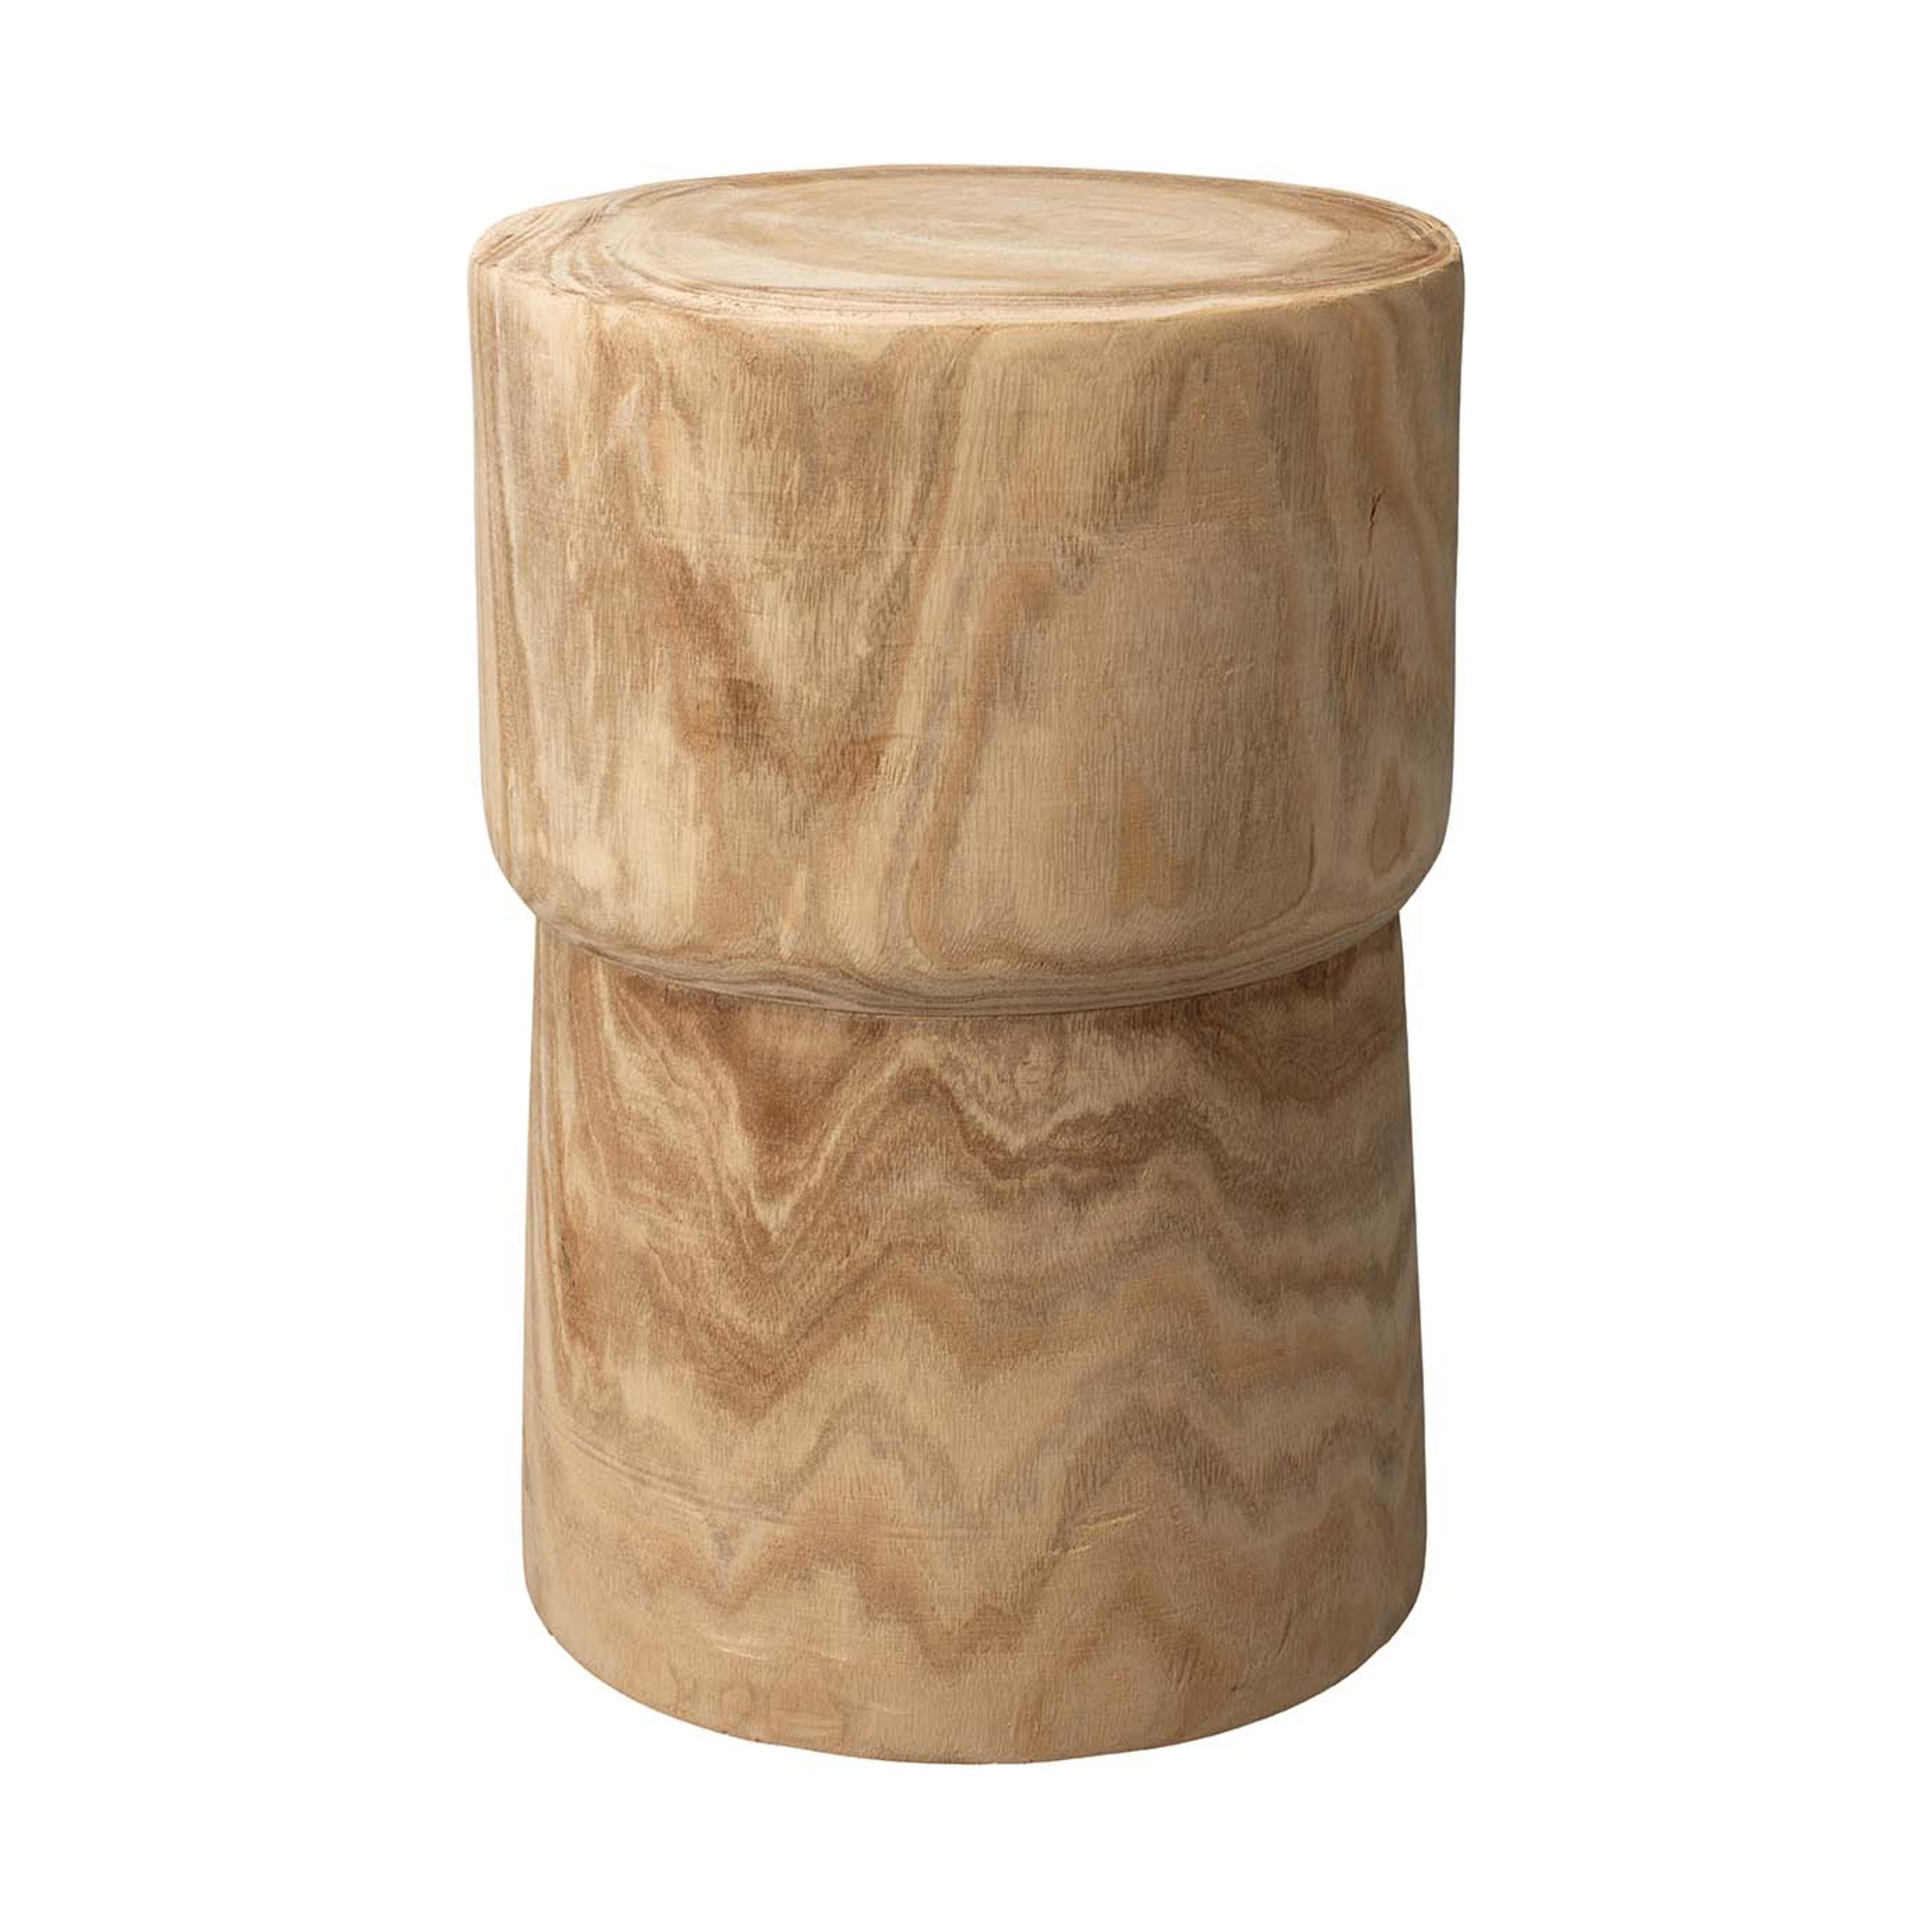 Jamie Young Company - 20YUCC-STWD - Yucca Side Table -  - Brown